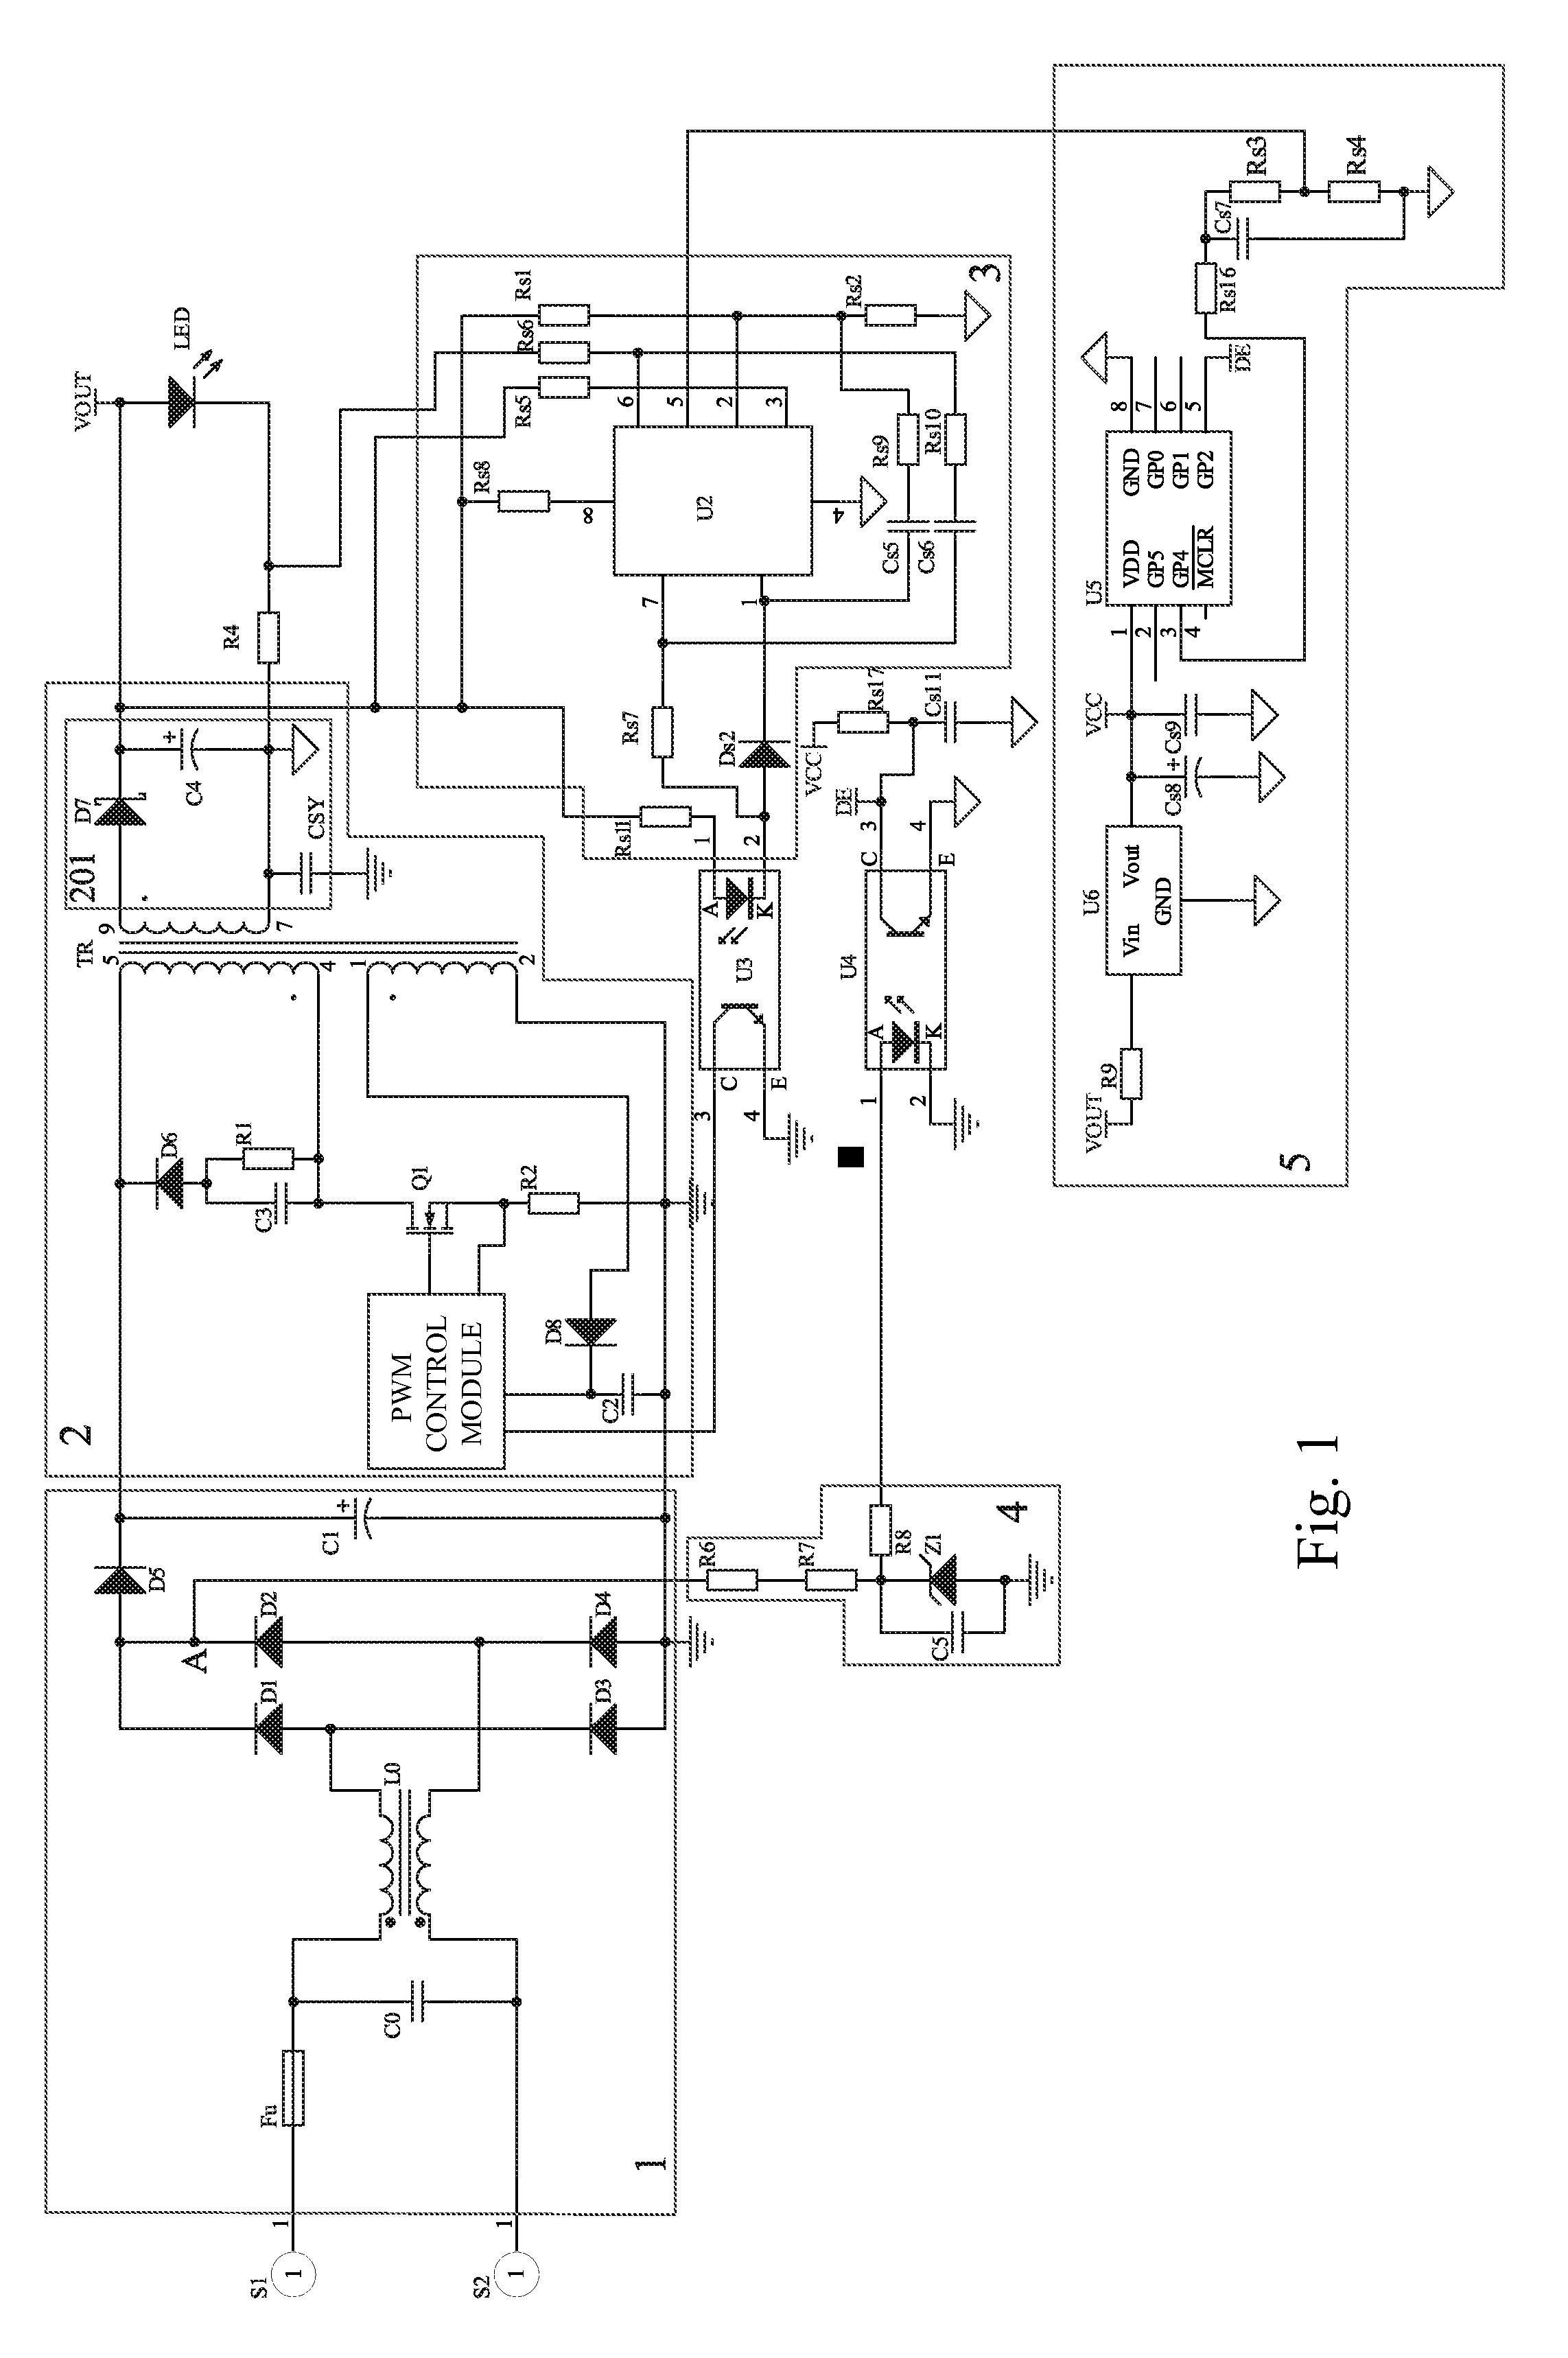 Stepped dimming device for LED lamp